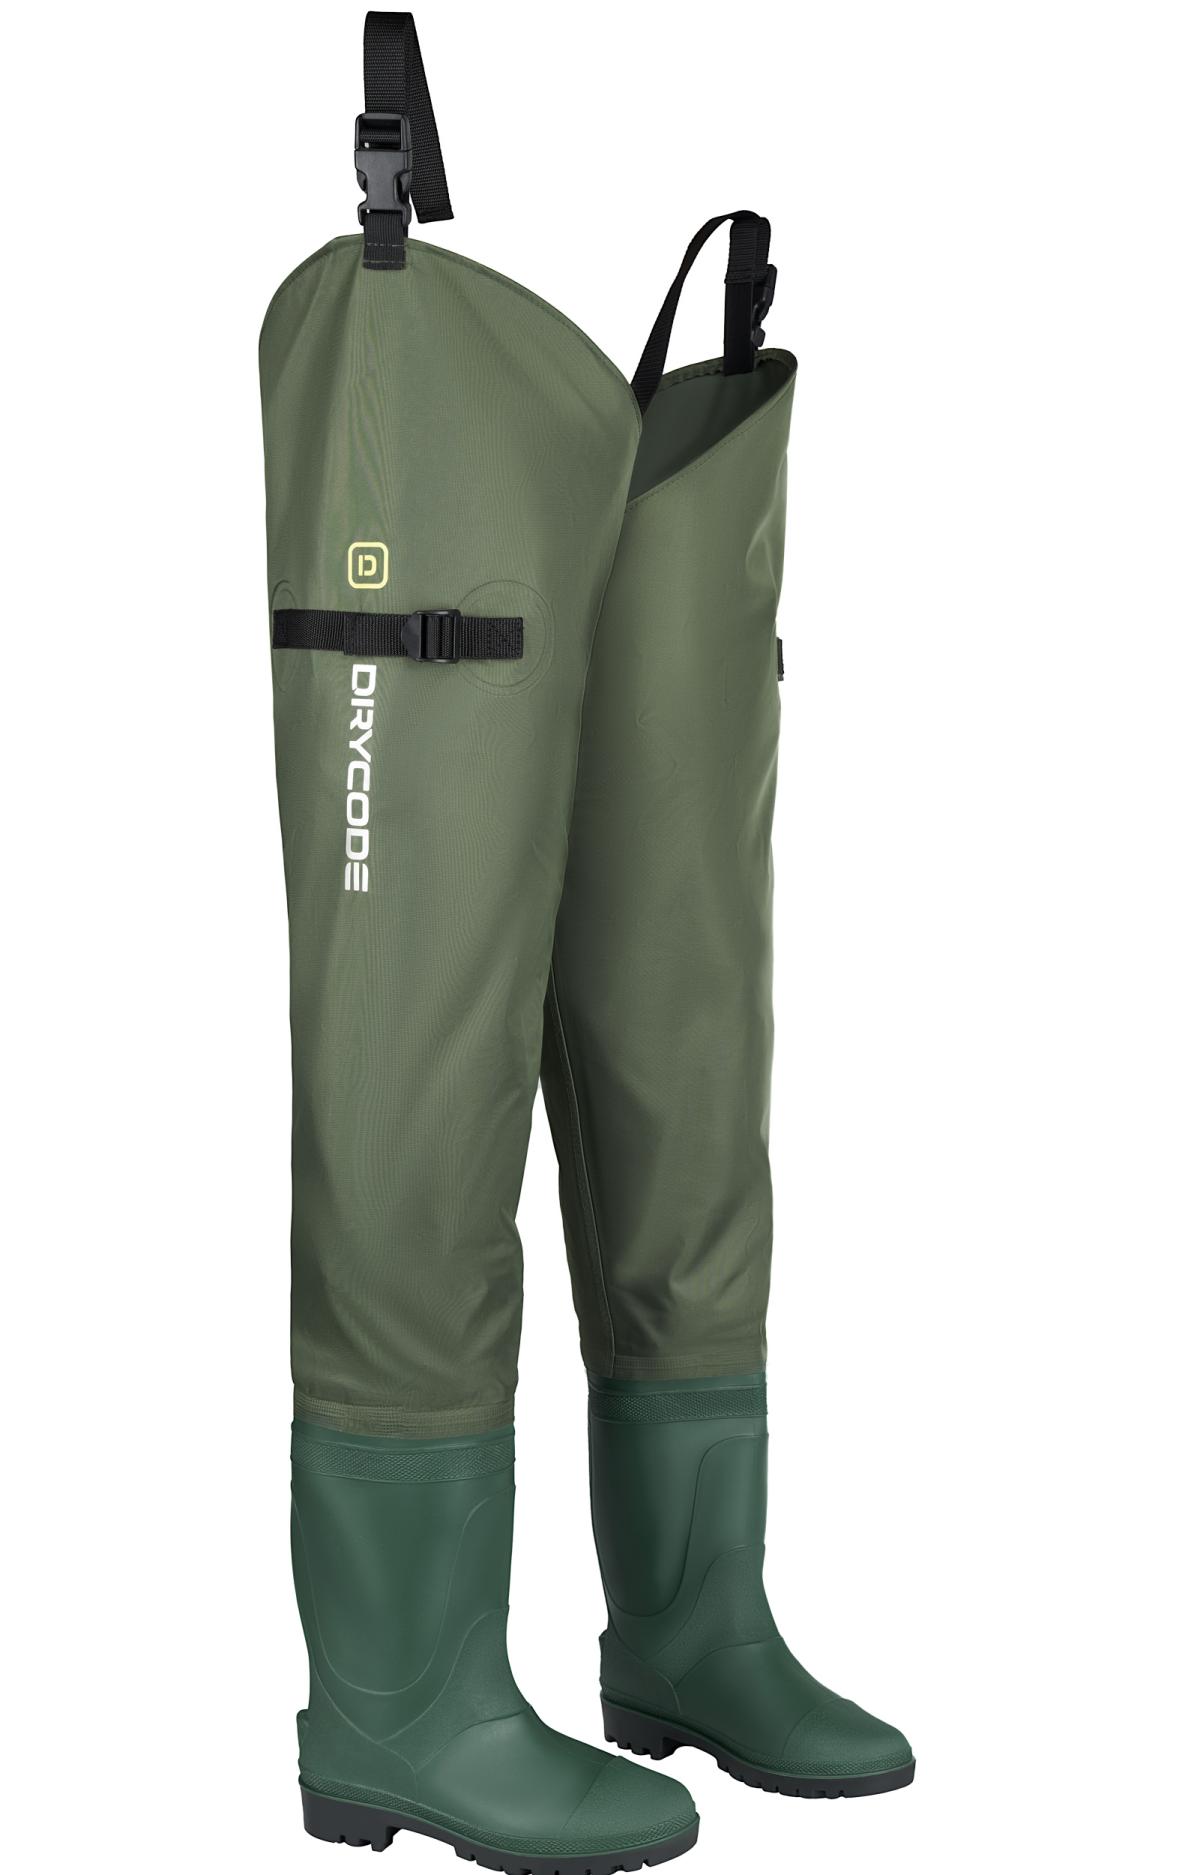 DRYCODE Hip Waders for Men, Waterproof Hip Boot for Women, With2-Ply PVC/Nylon